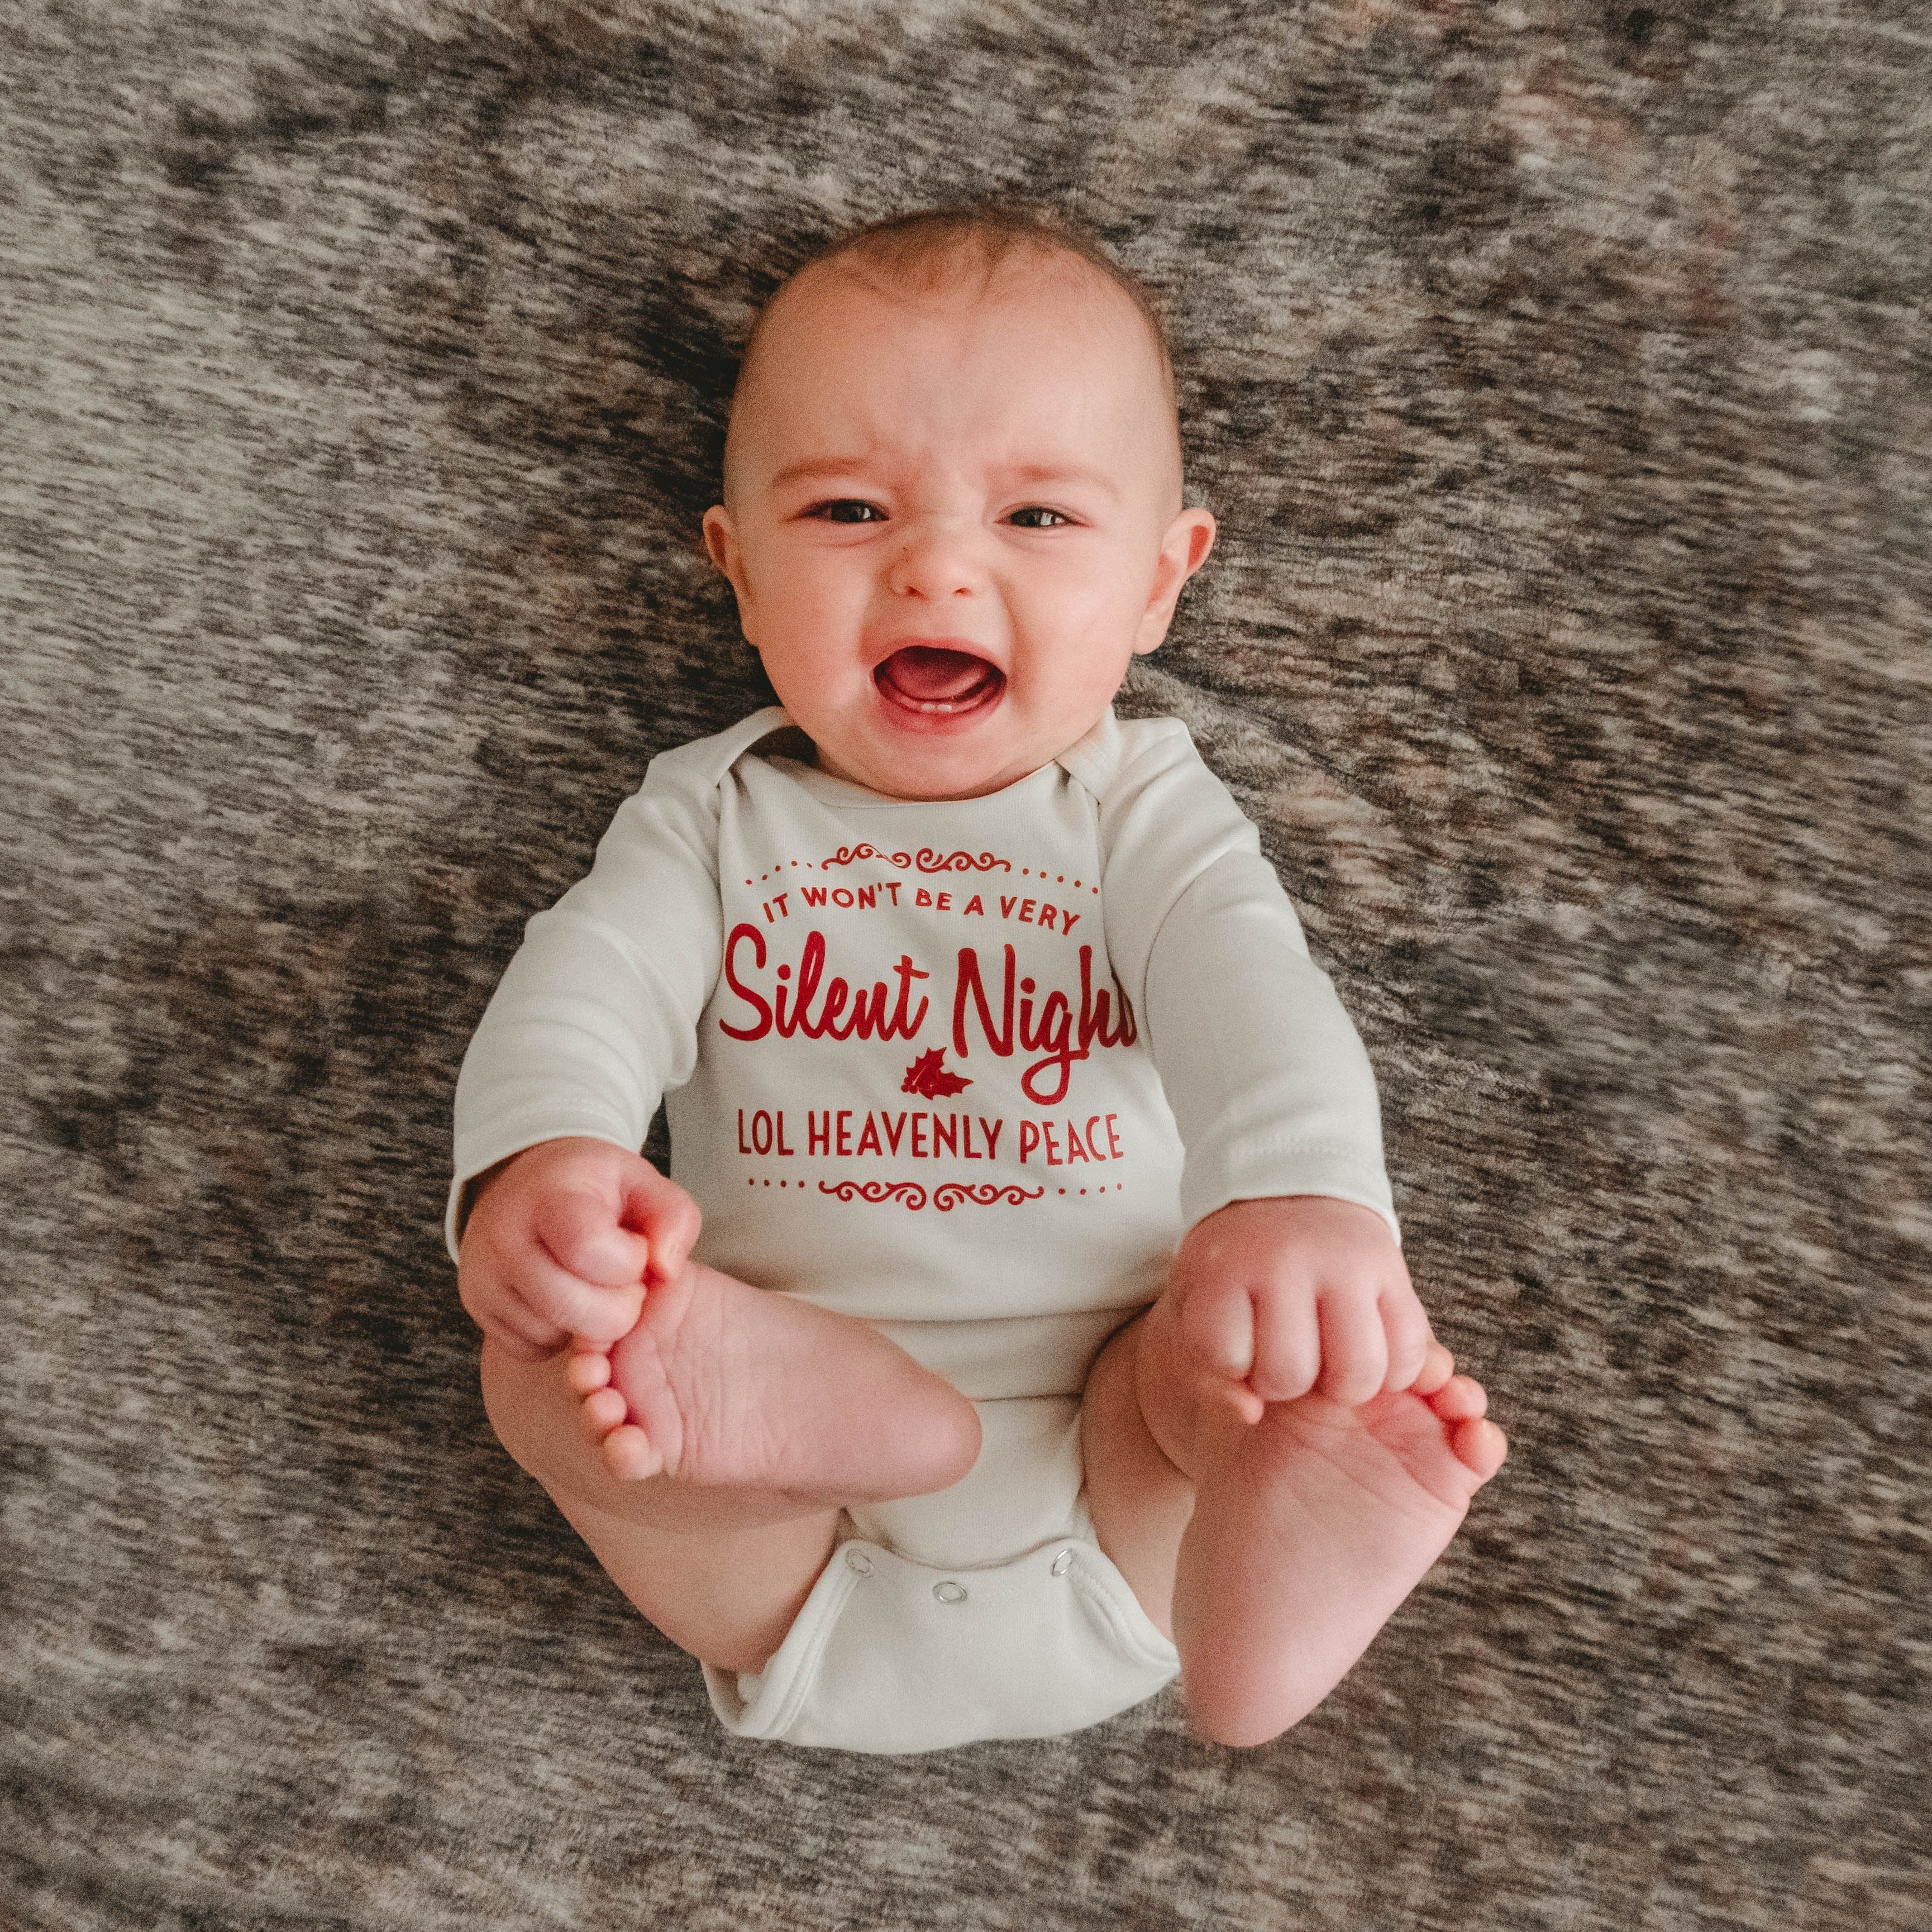 Vintage-Style Not A Silent Night | Funny Baby Christmas Onesie | by Cuddle Sleep Dream 3M Long Sleeve for Infant